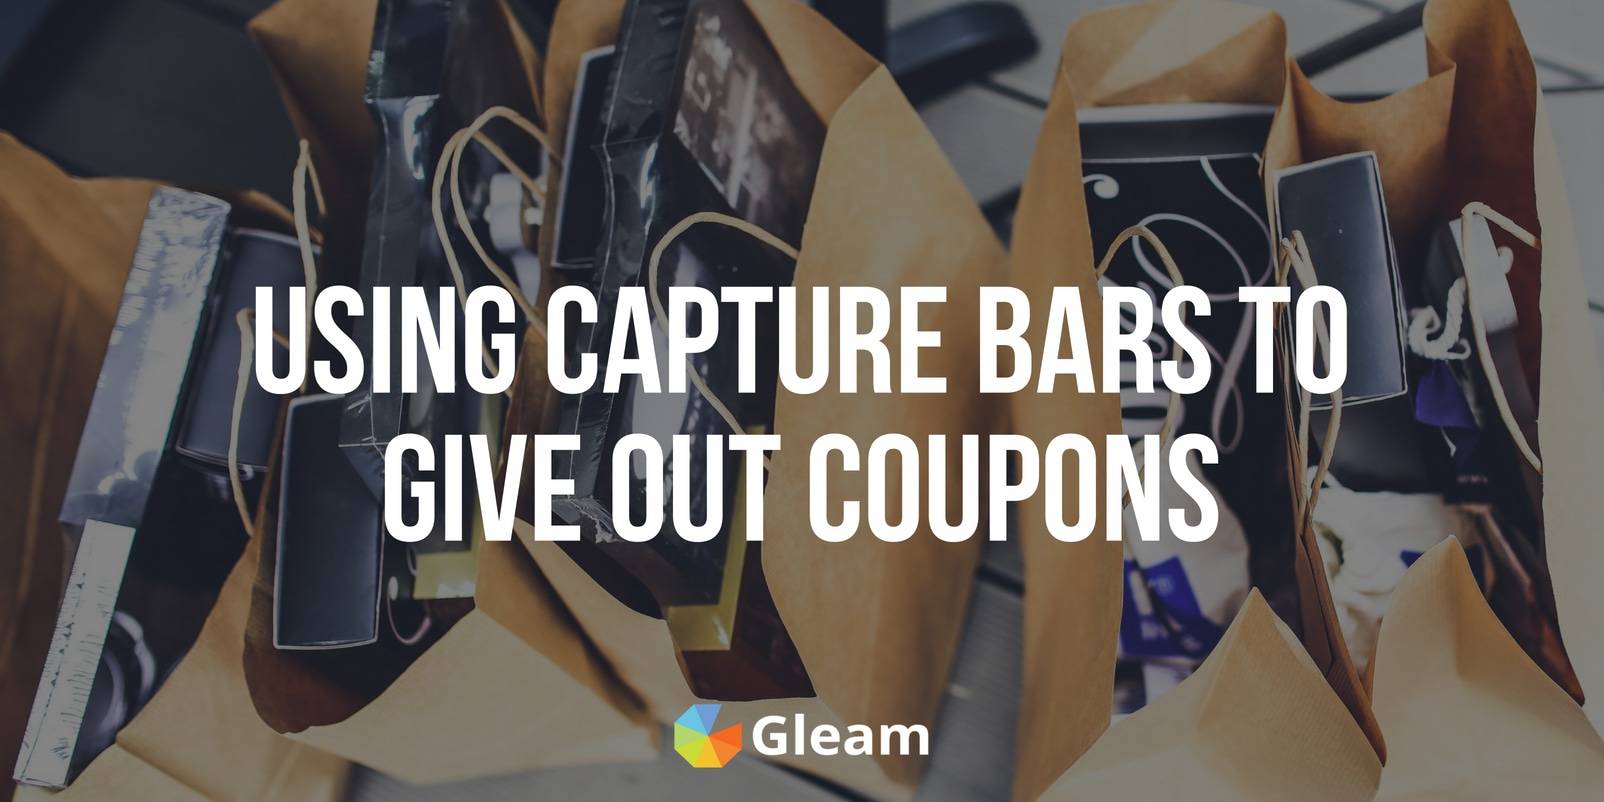 Using Capture Bars to Give Out Coupons